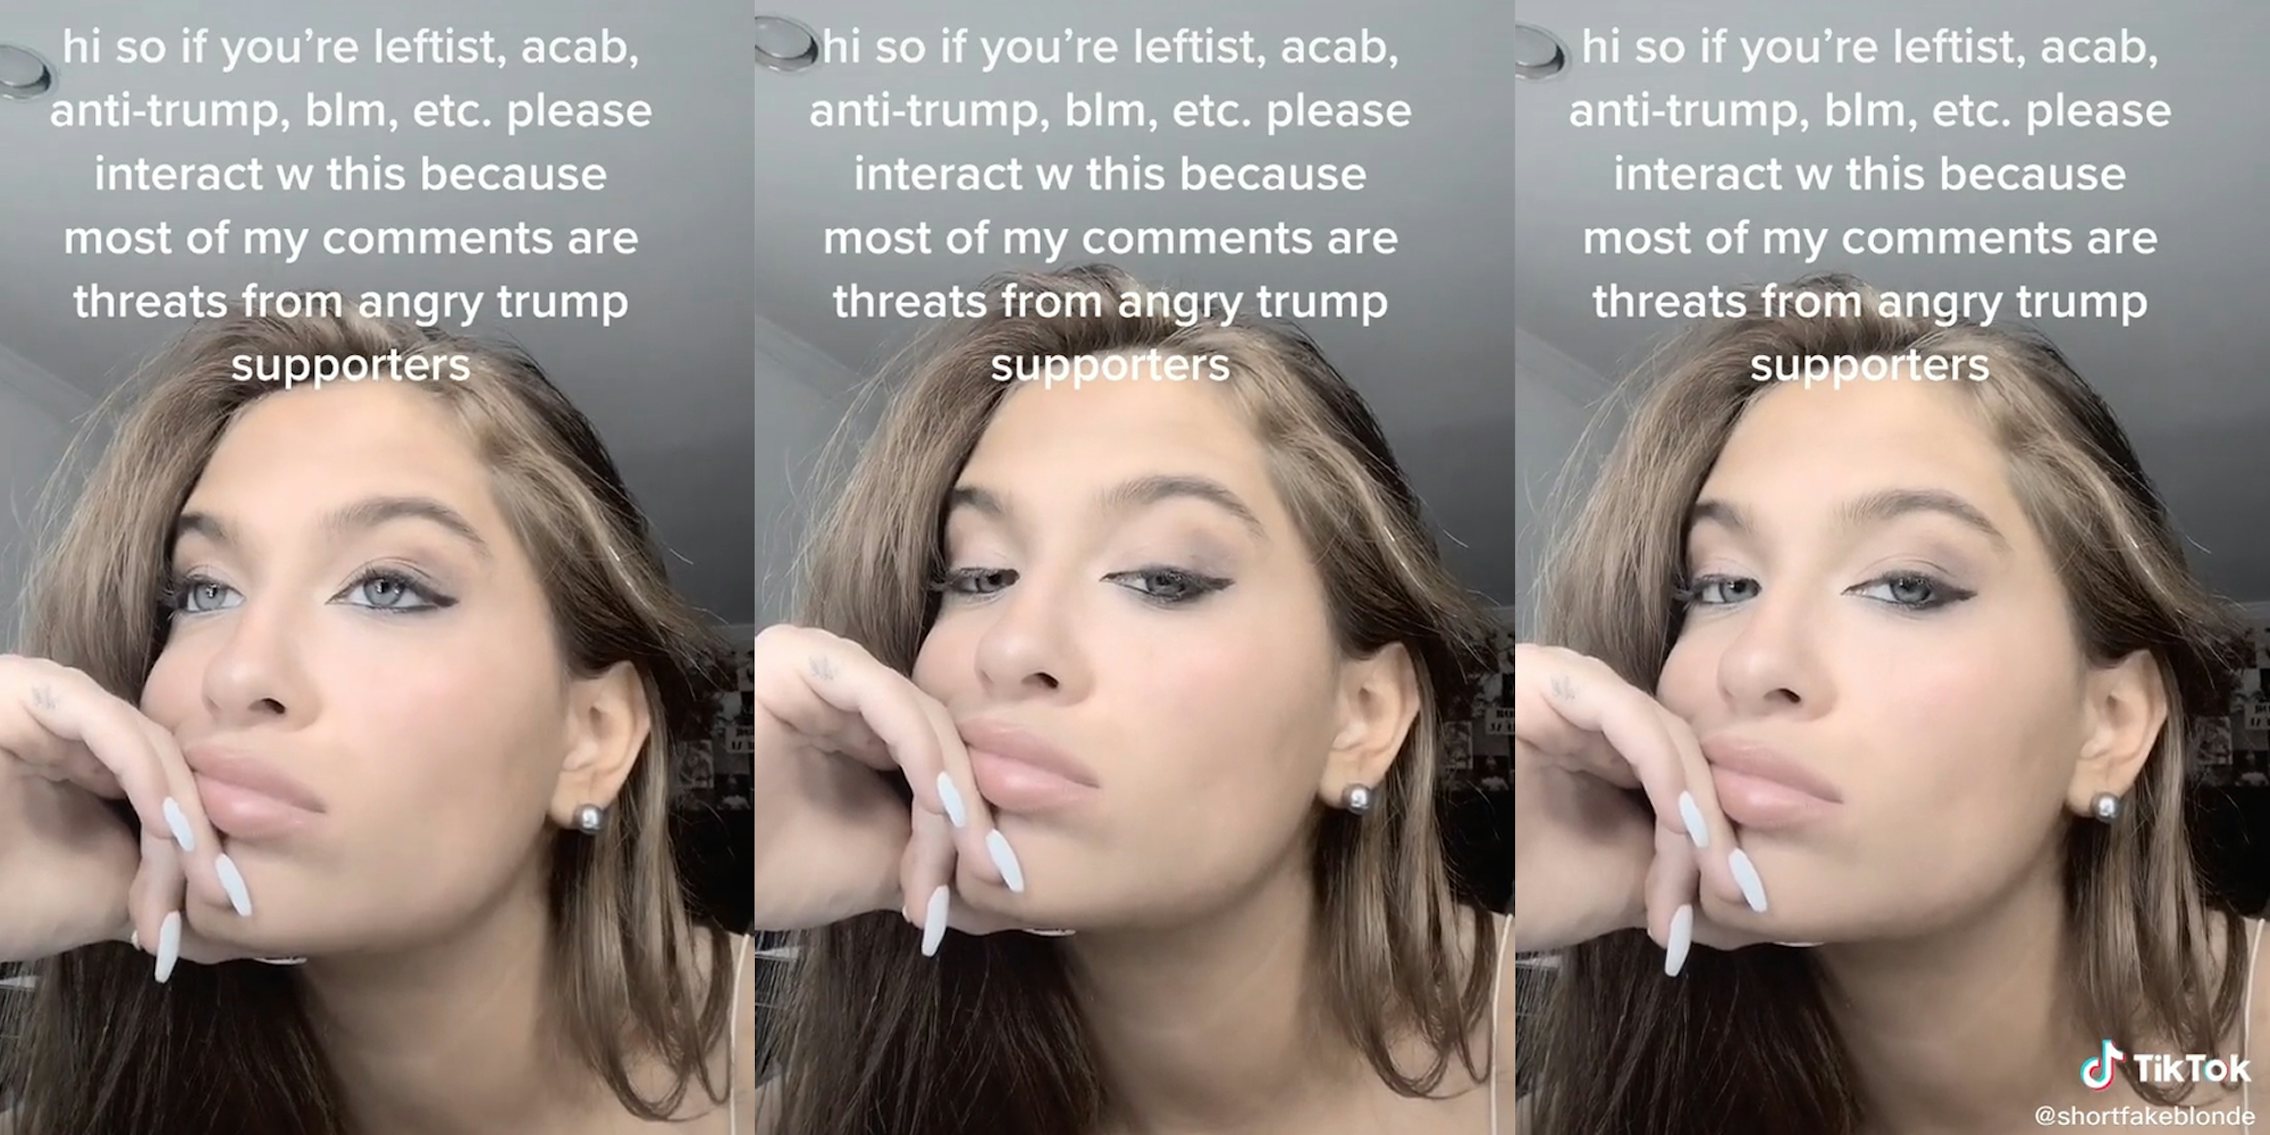 claudia conway with 'hi so if you're leftist, acab, anti-trump, blm, etc. please interact w this because most of my comments are threats from angry trump supporters' tiktok